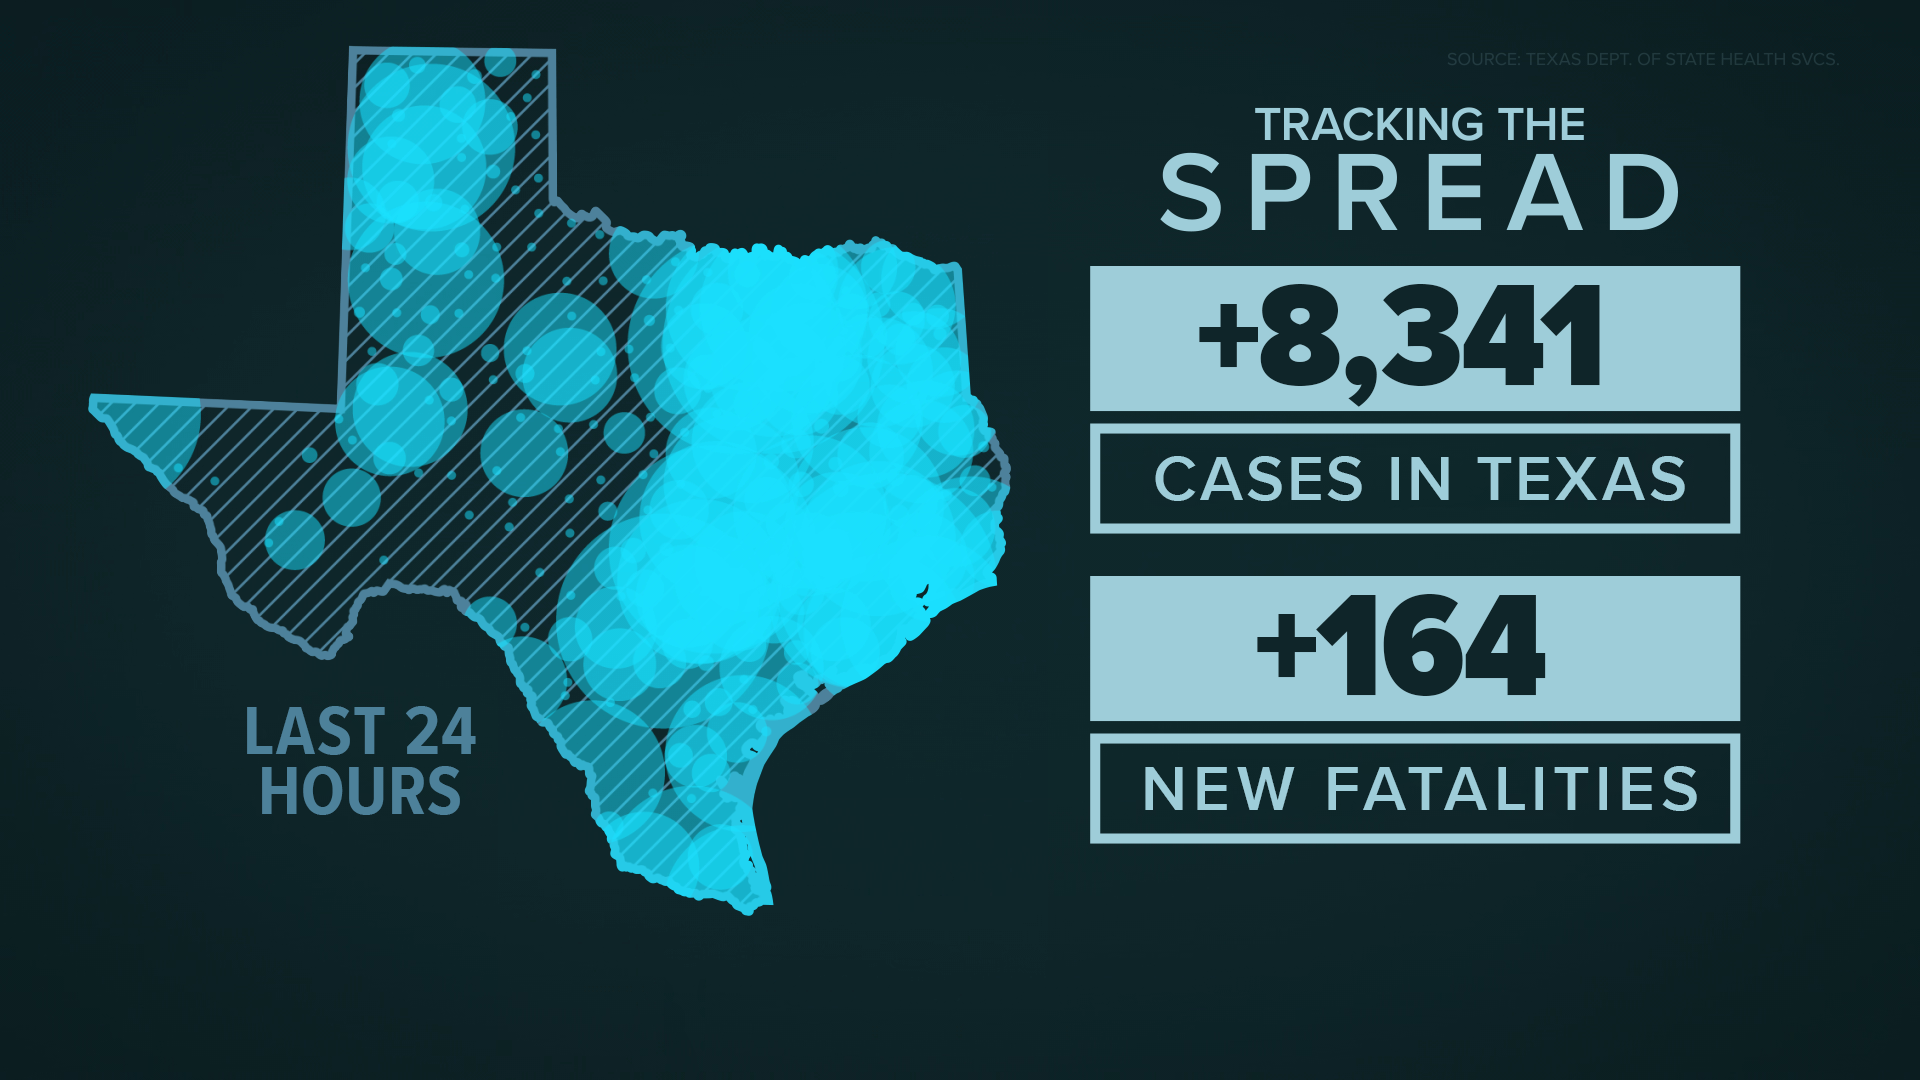 The state's seven-day average of new coronavirus cases is on a downward trend since July 20.